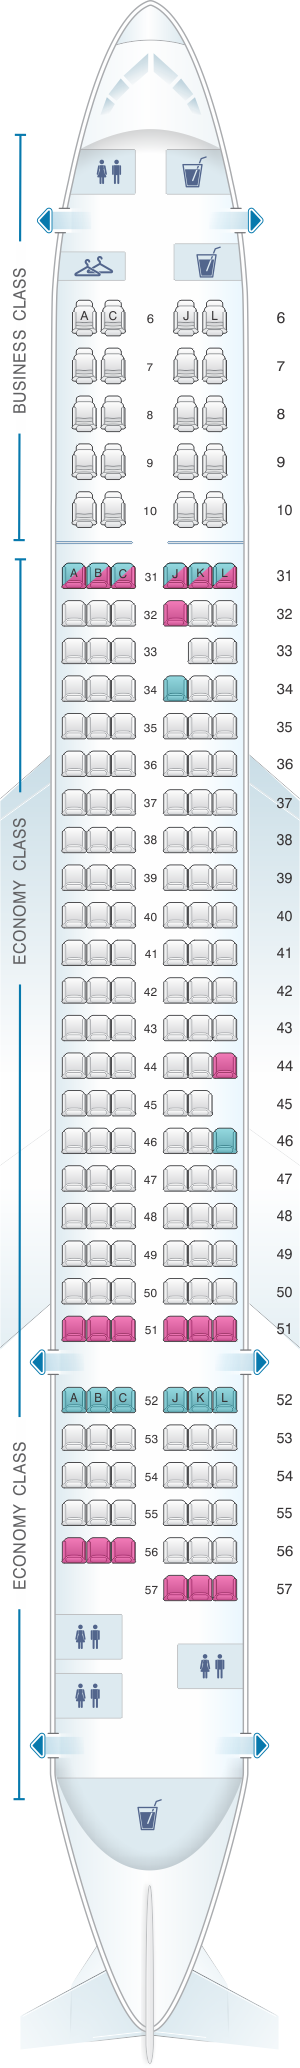 Seat Map China Eastern Airlines Airbus A321 200 | SeatMaestro.com